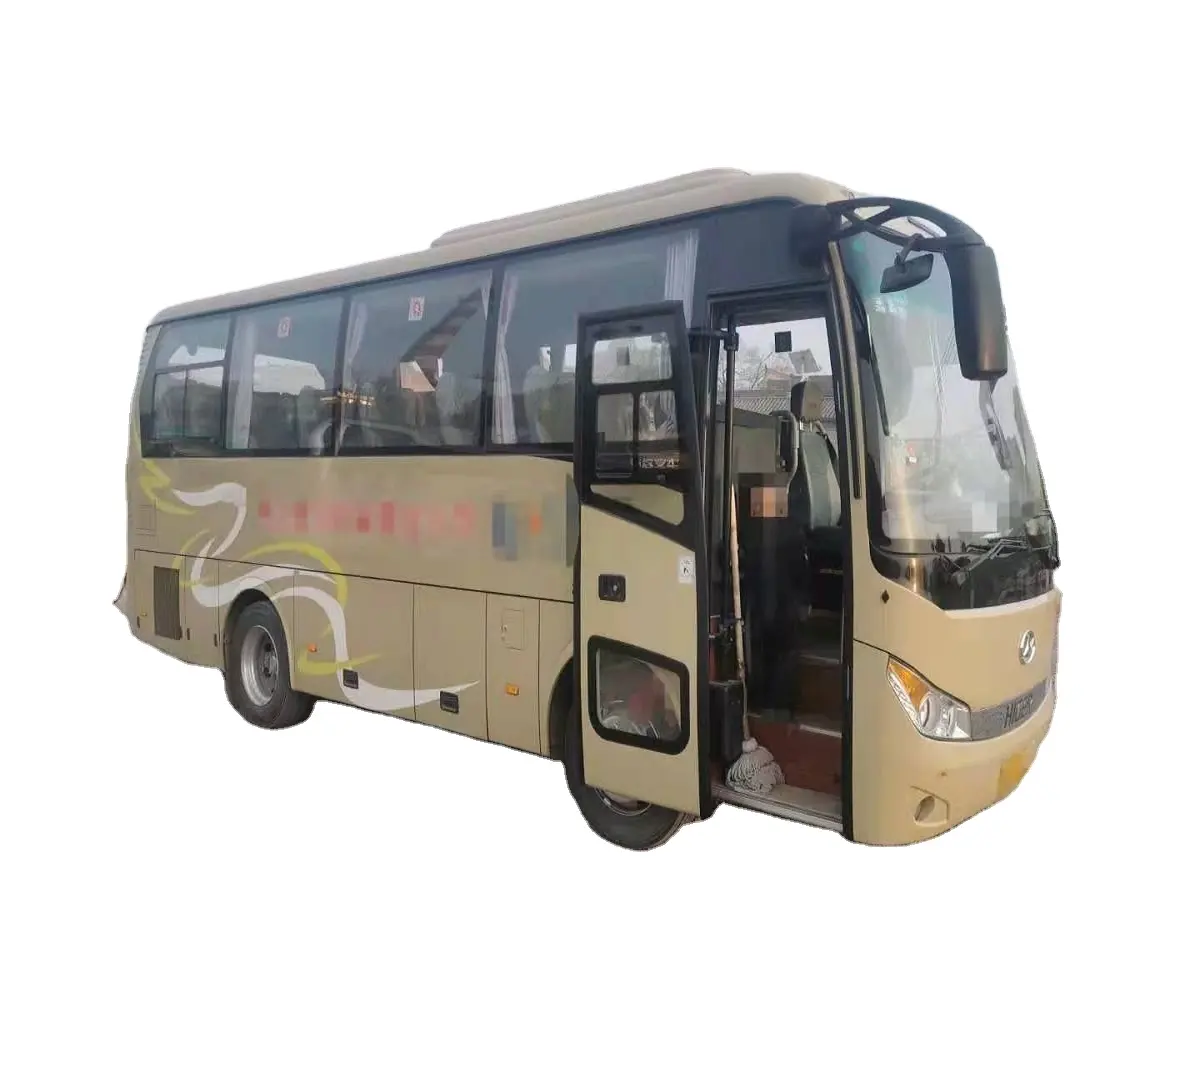 2017 Year HIGER 30 Seats KLQ6755KQE51 Used Bus for export sale with low price